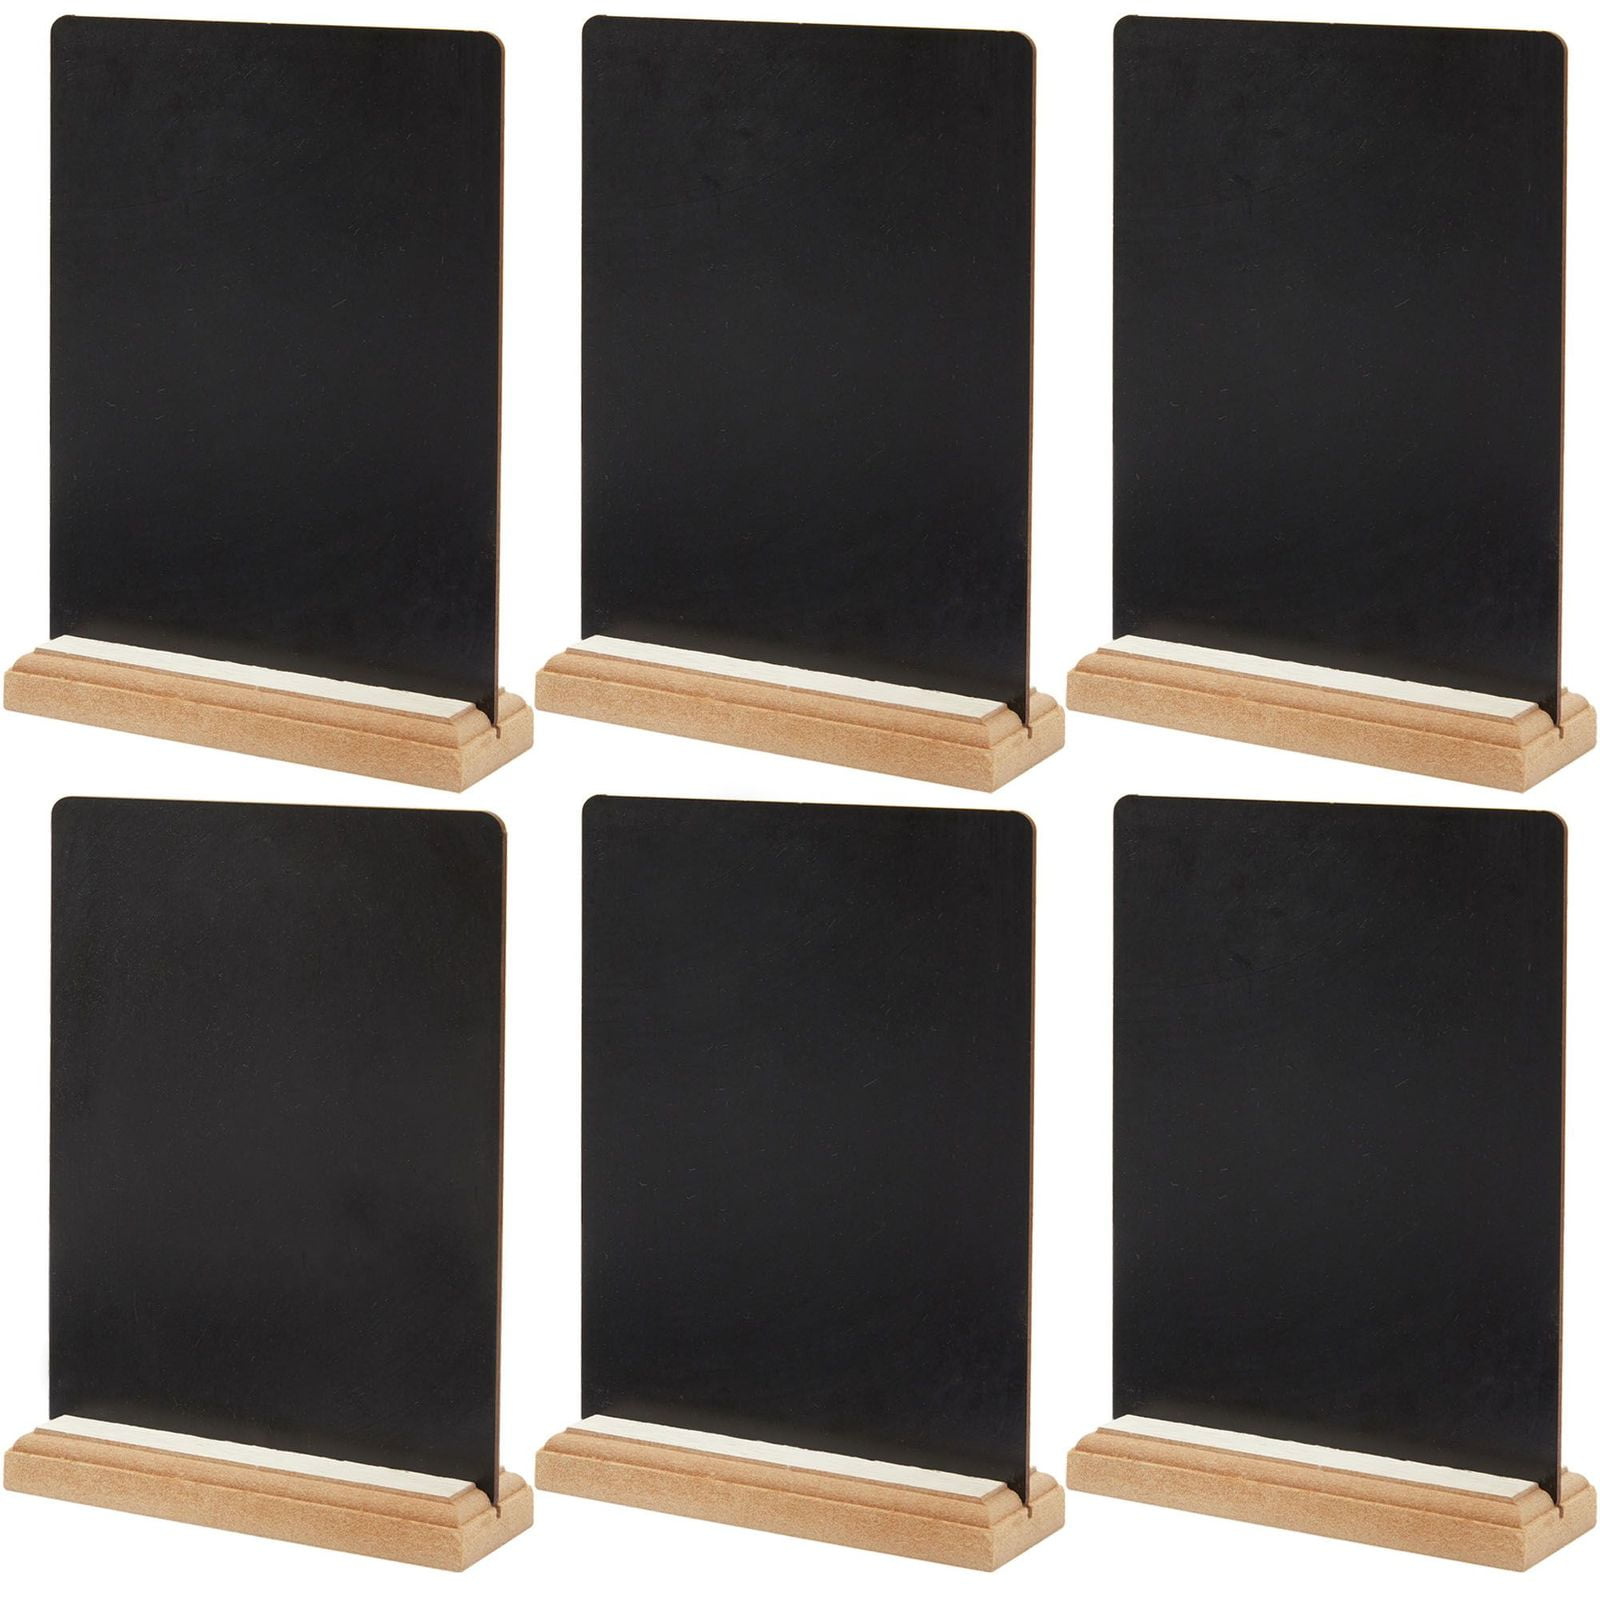 LEEleegang 10pcs Wooden Mini Blackboard Table Sign Memo Message Stand Chalk Board Wedding Party Decoration Supplies